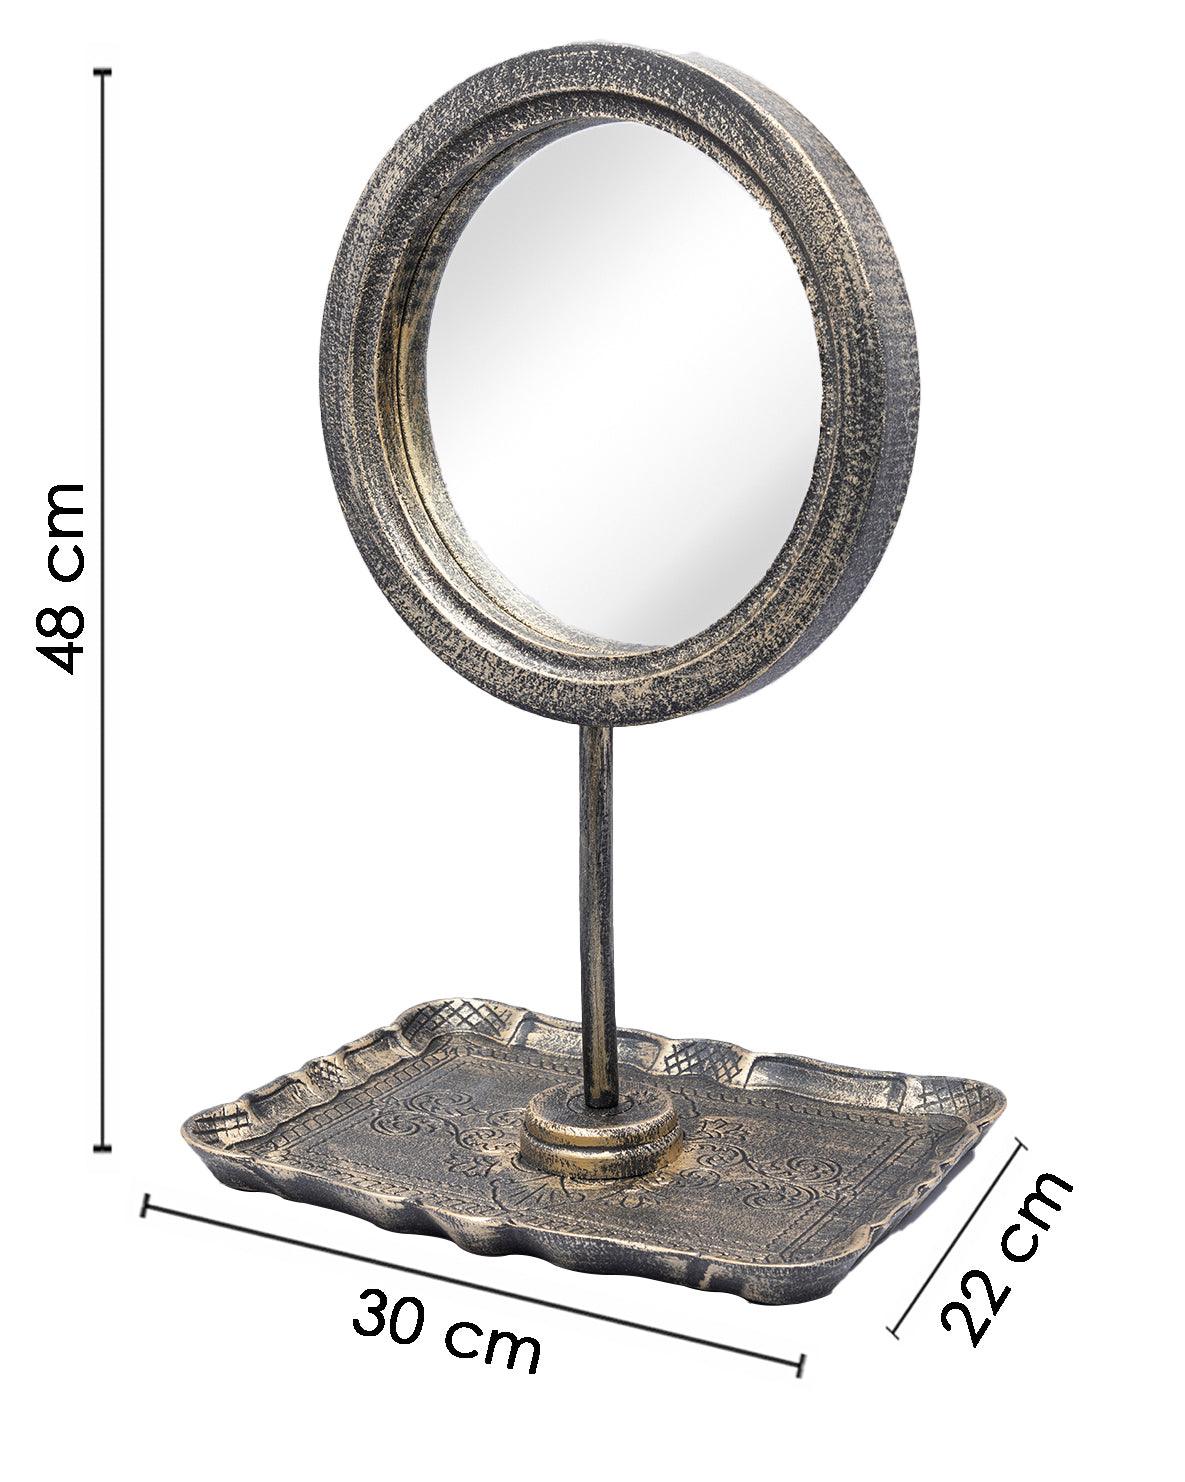 Mirror with Jewellery Holder, Chrome Finish, Dressing Table, Ring Dish, Brown, MDF - MARKET 99